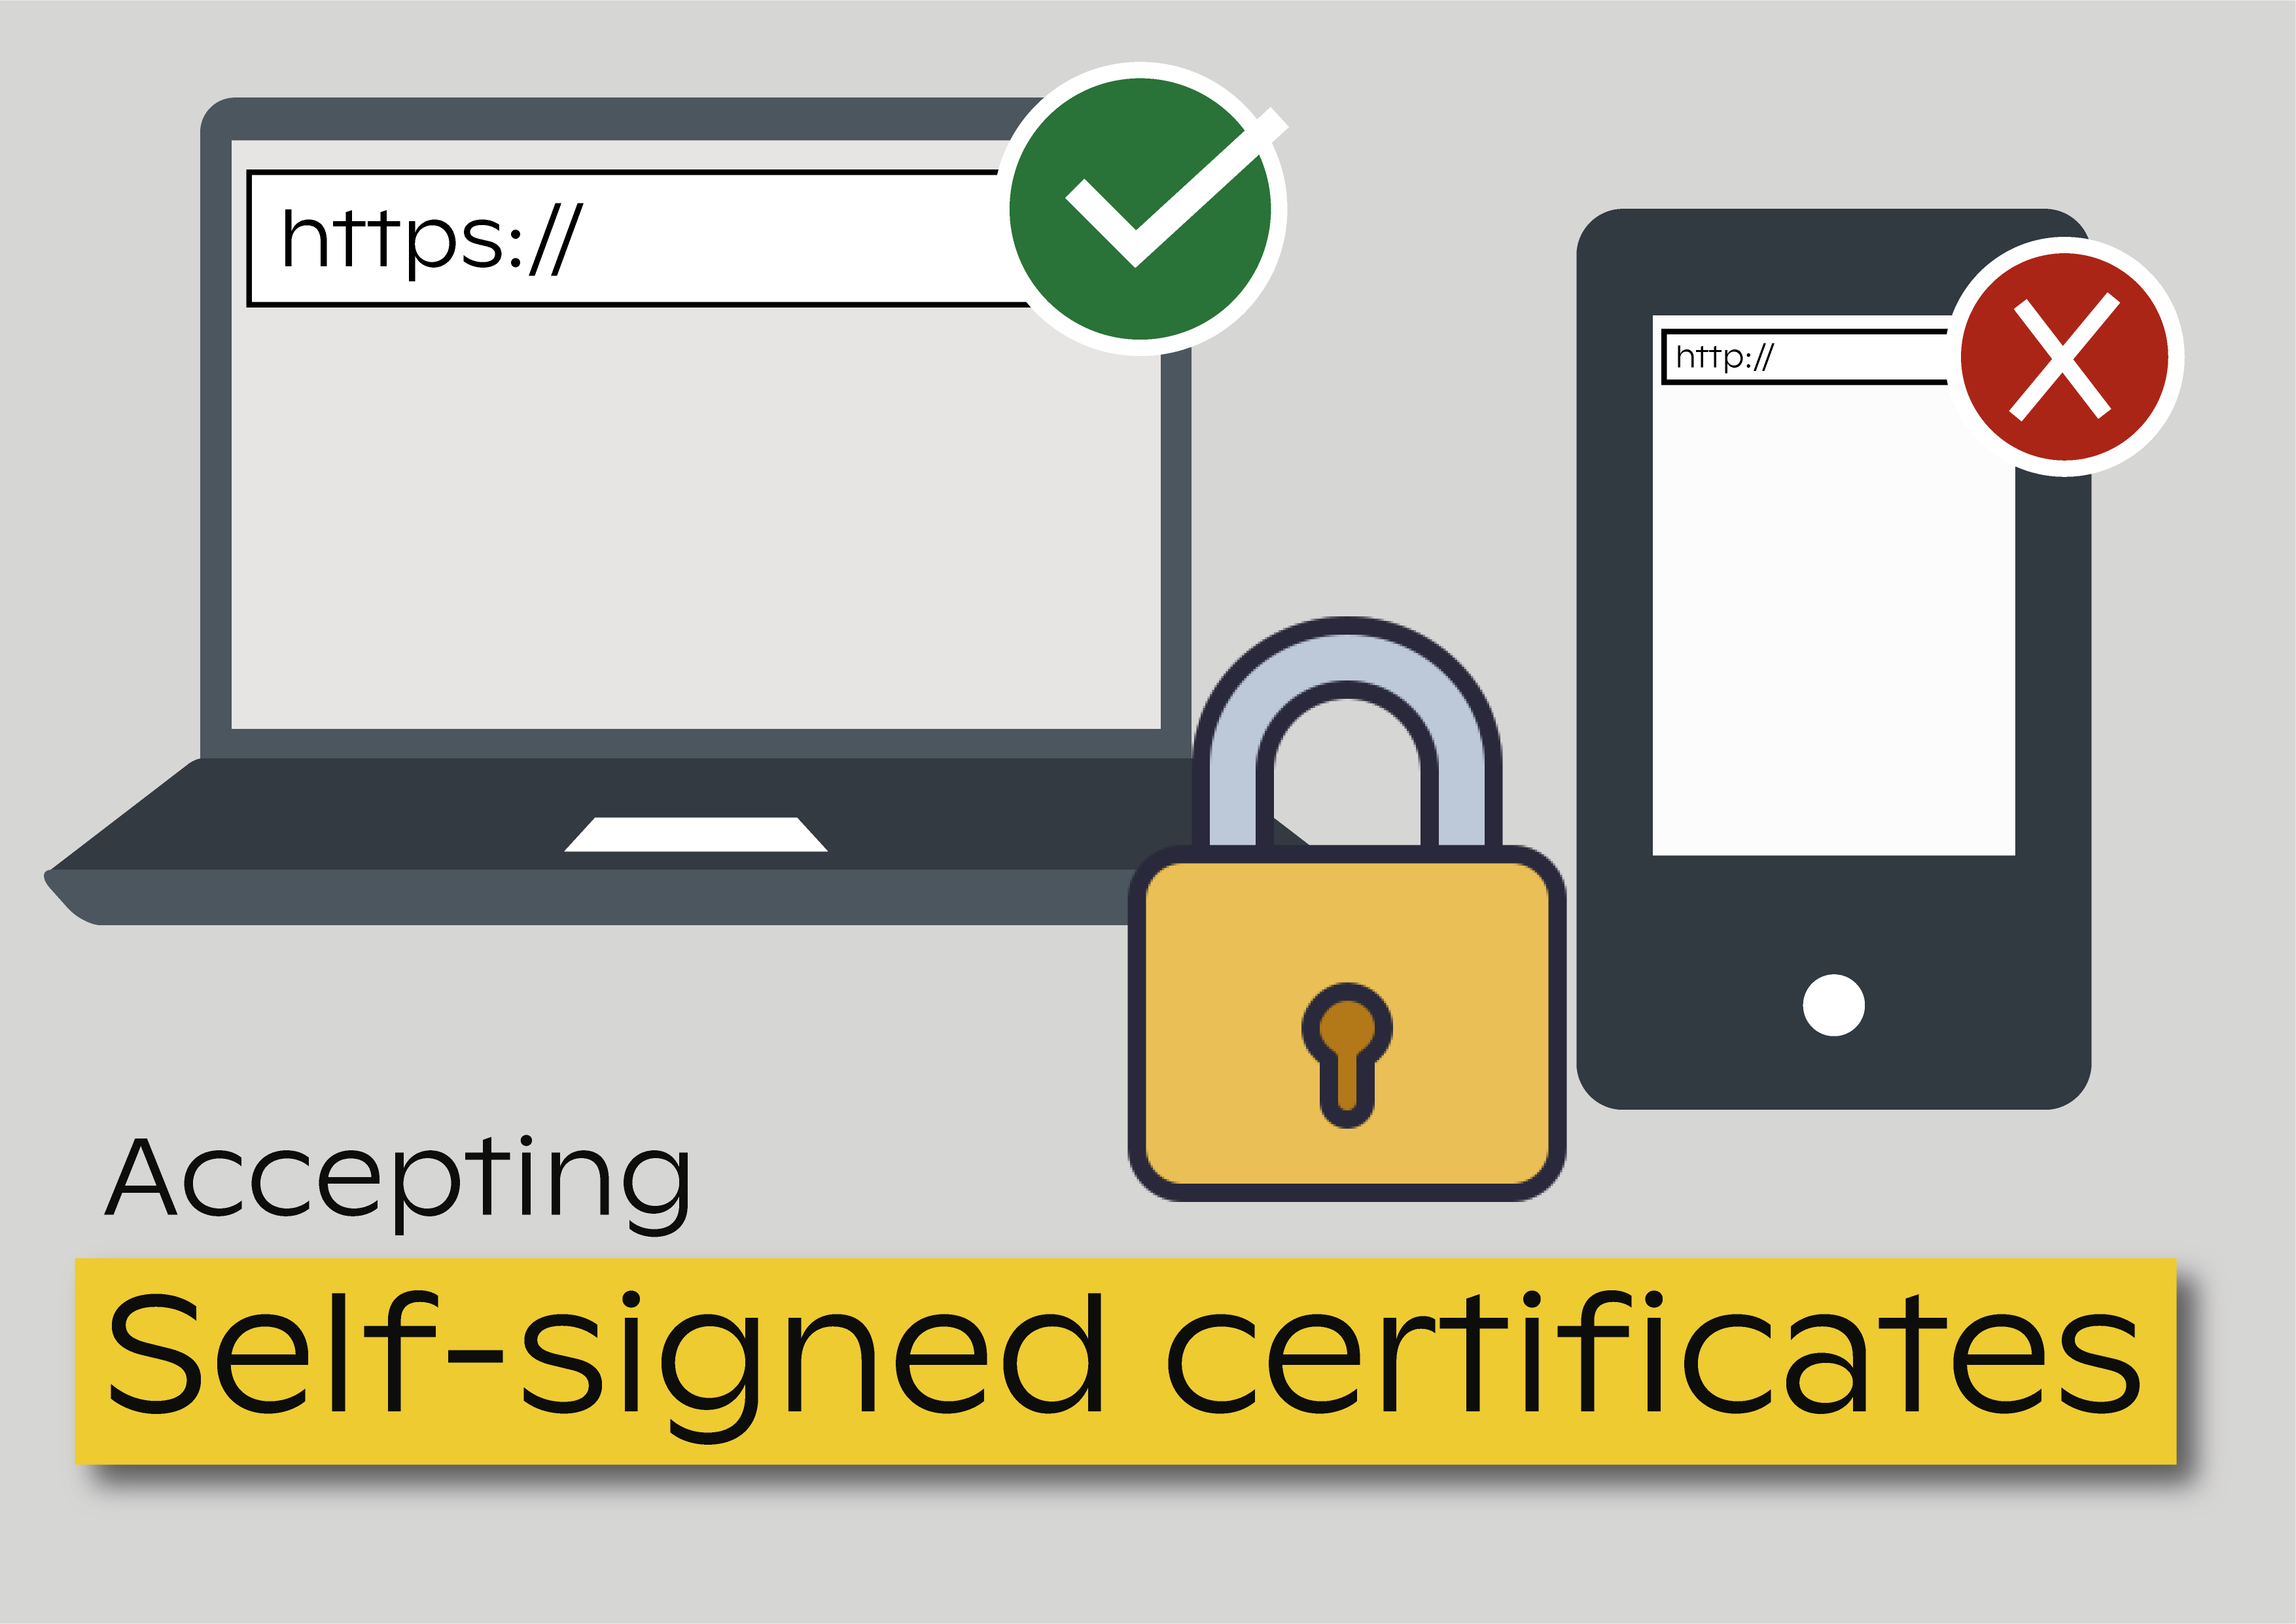 Accepting self-signed certificates in OKHttp3